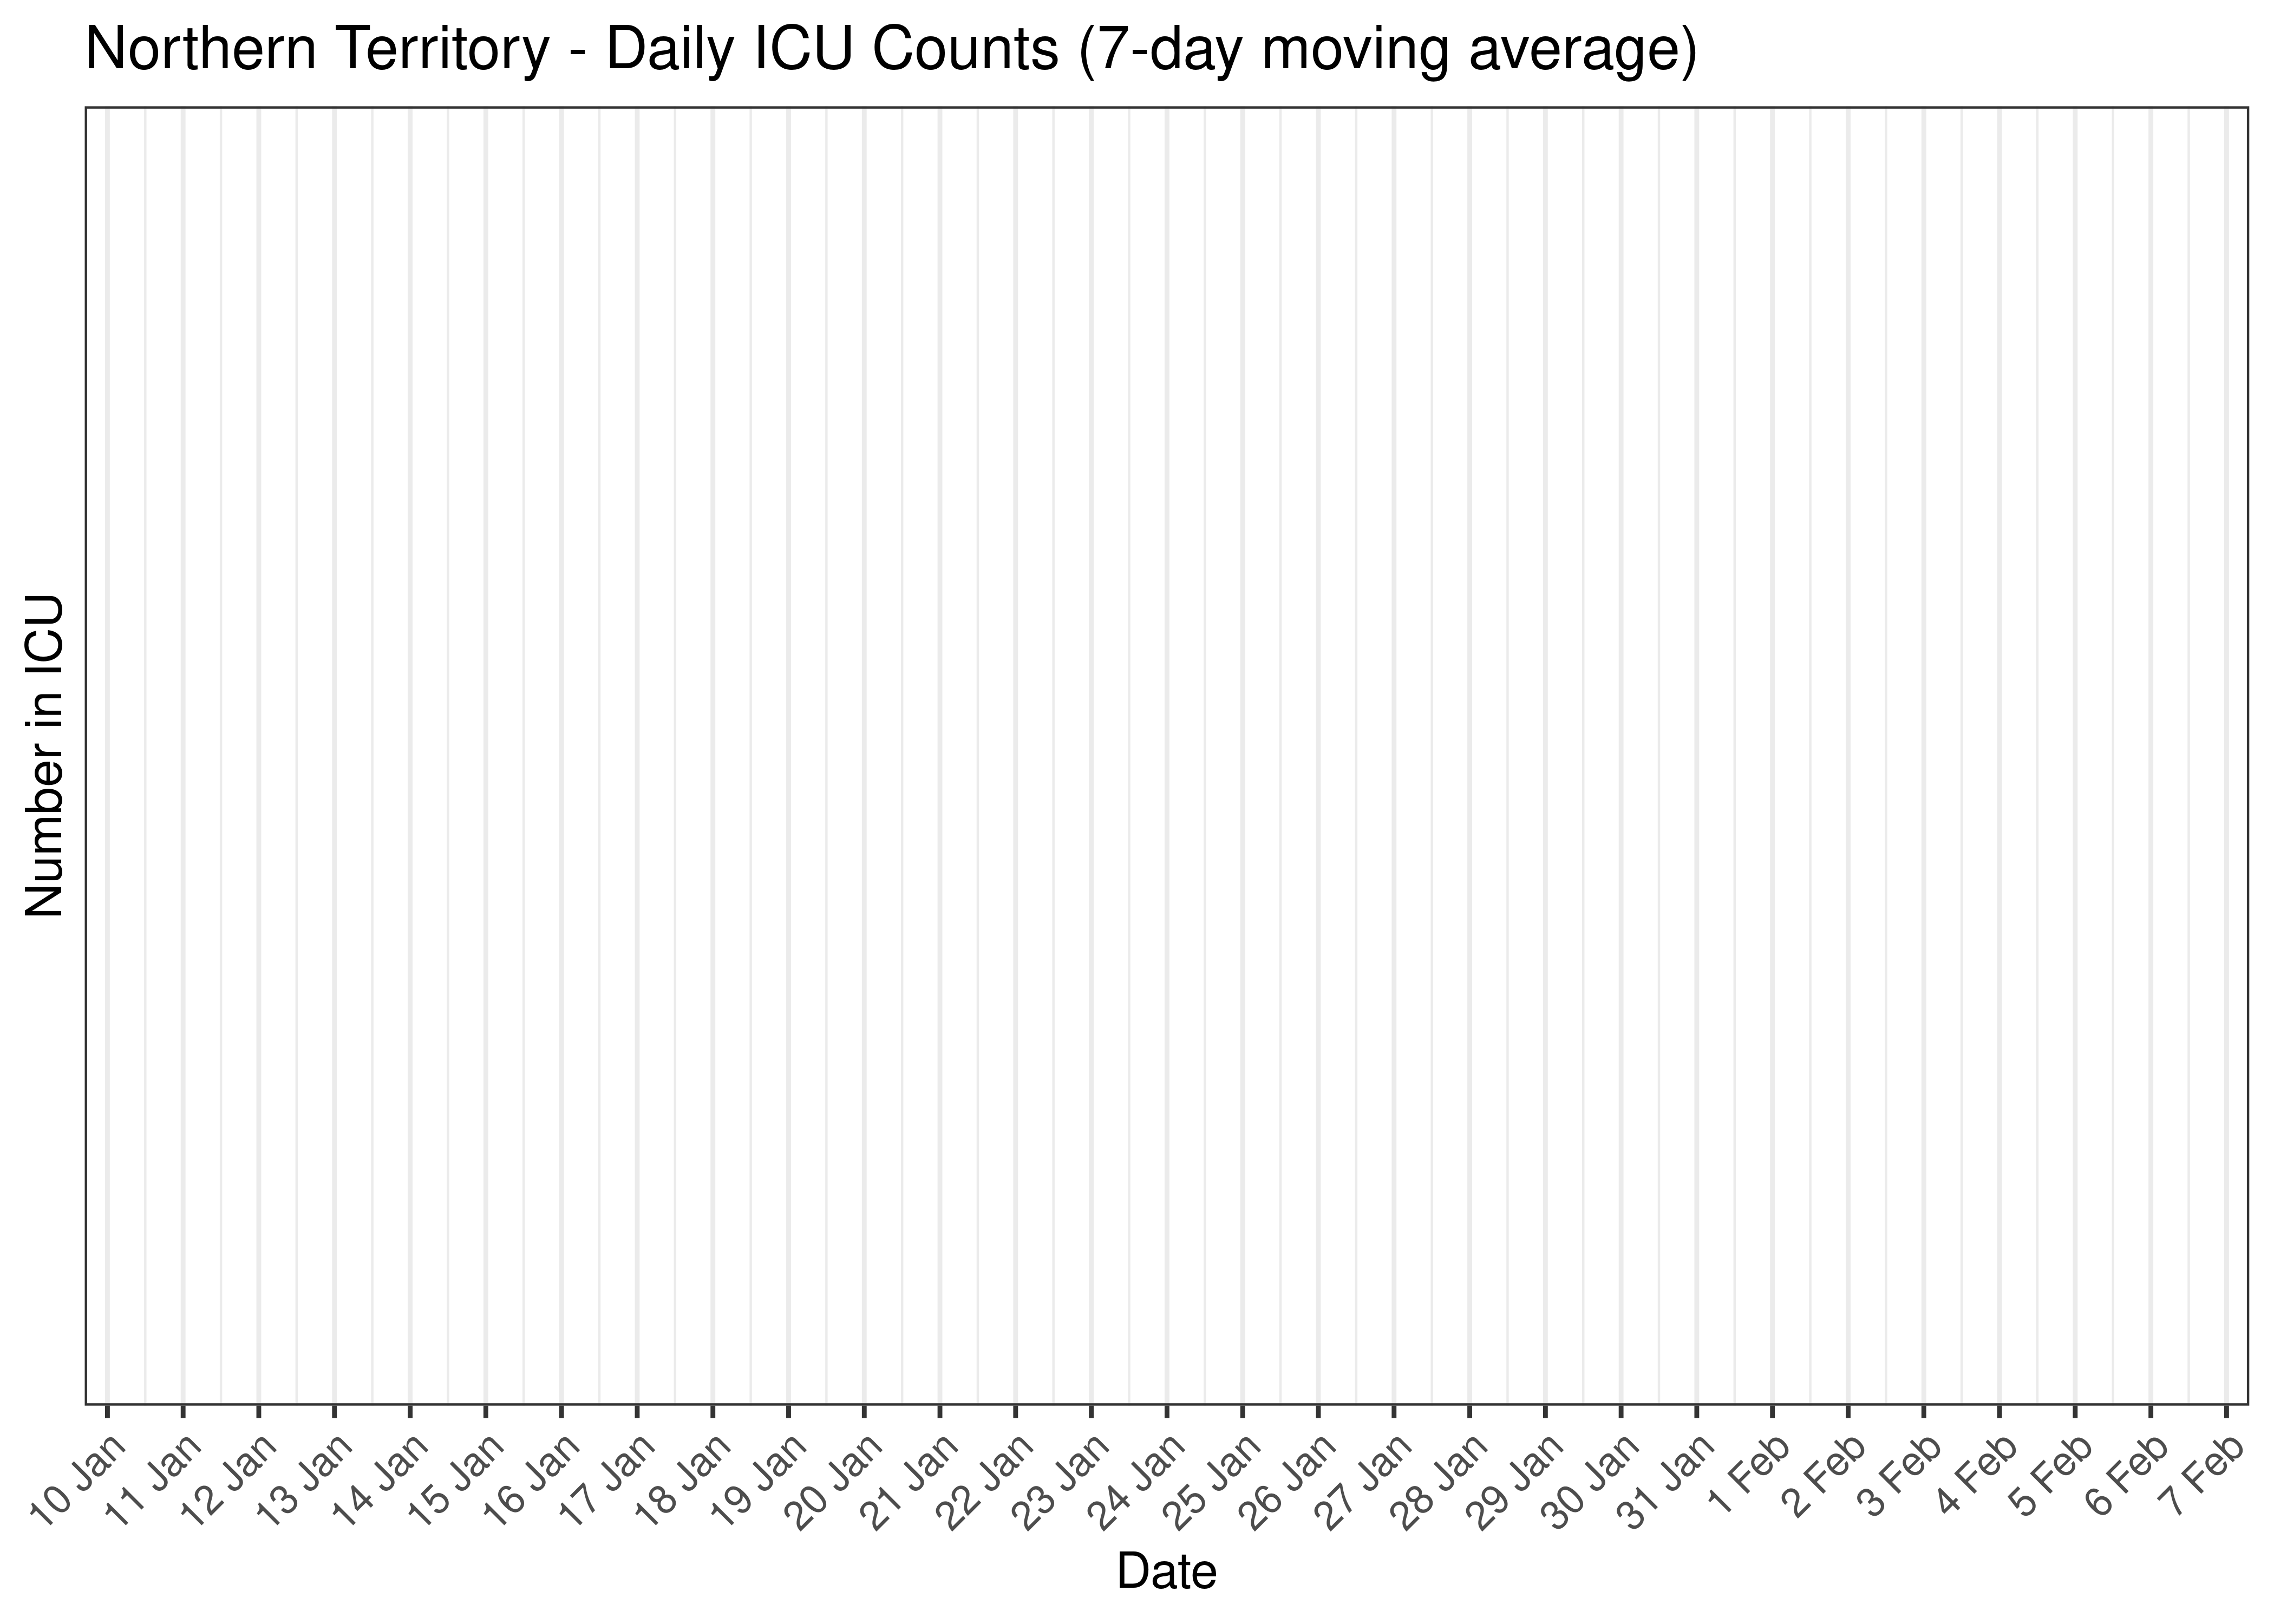 Northern Territory - Daily ICU Counts for Last 30-days (7-day moving average)